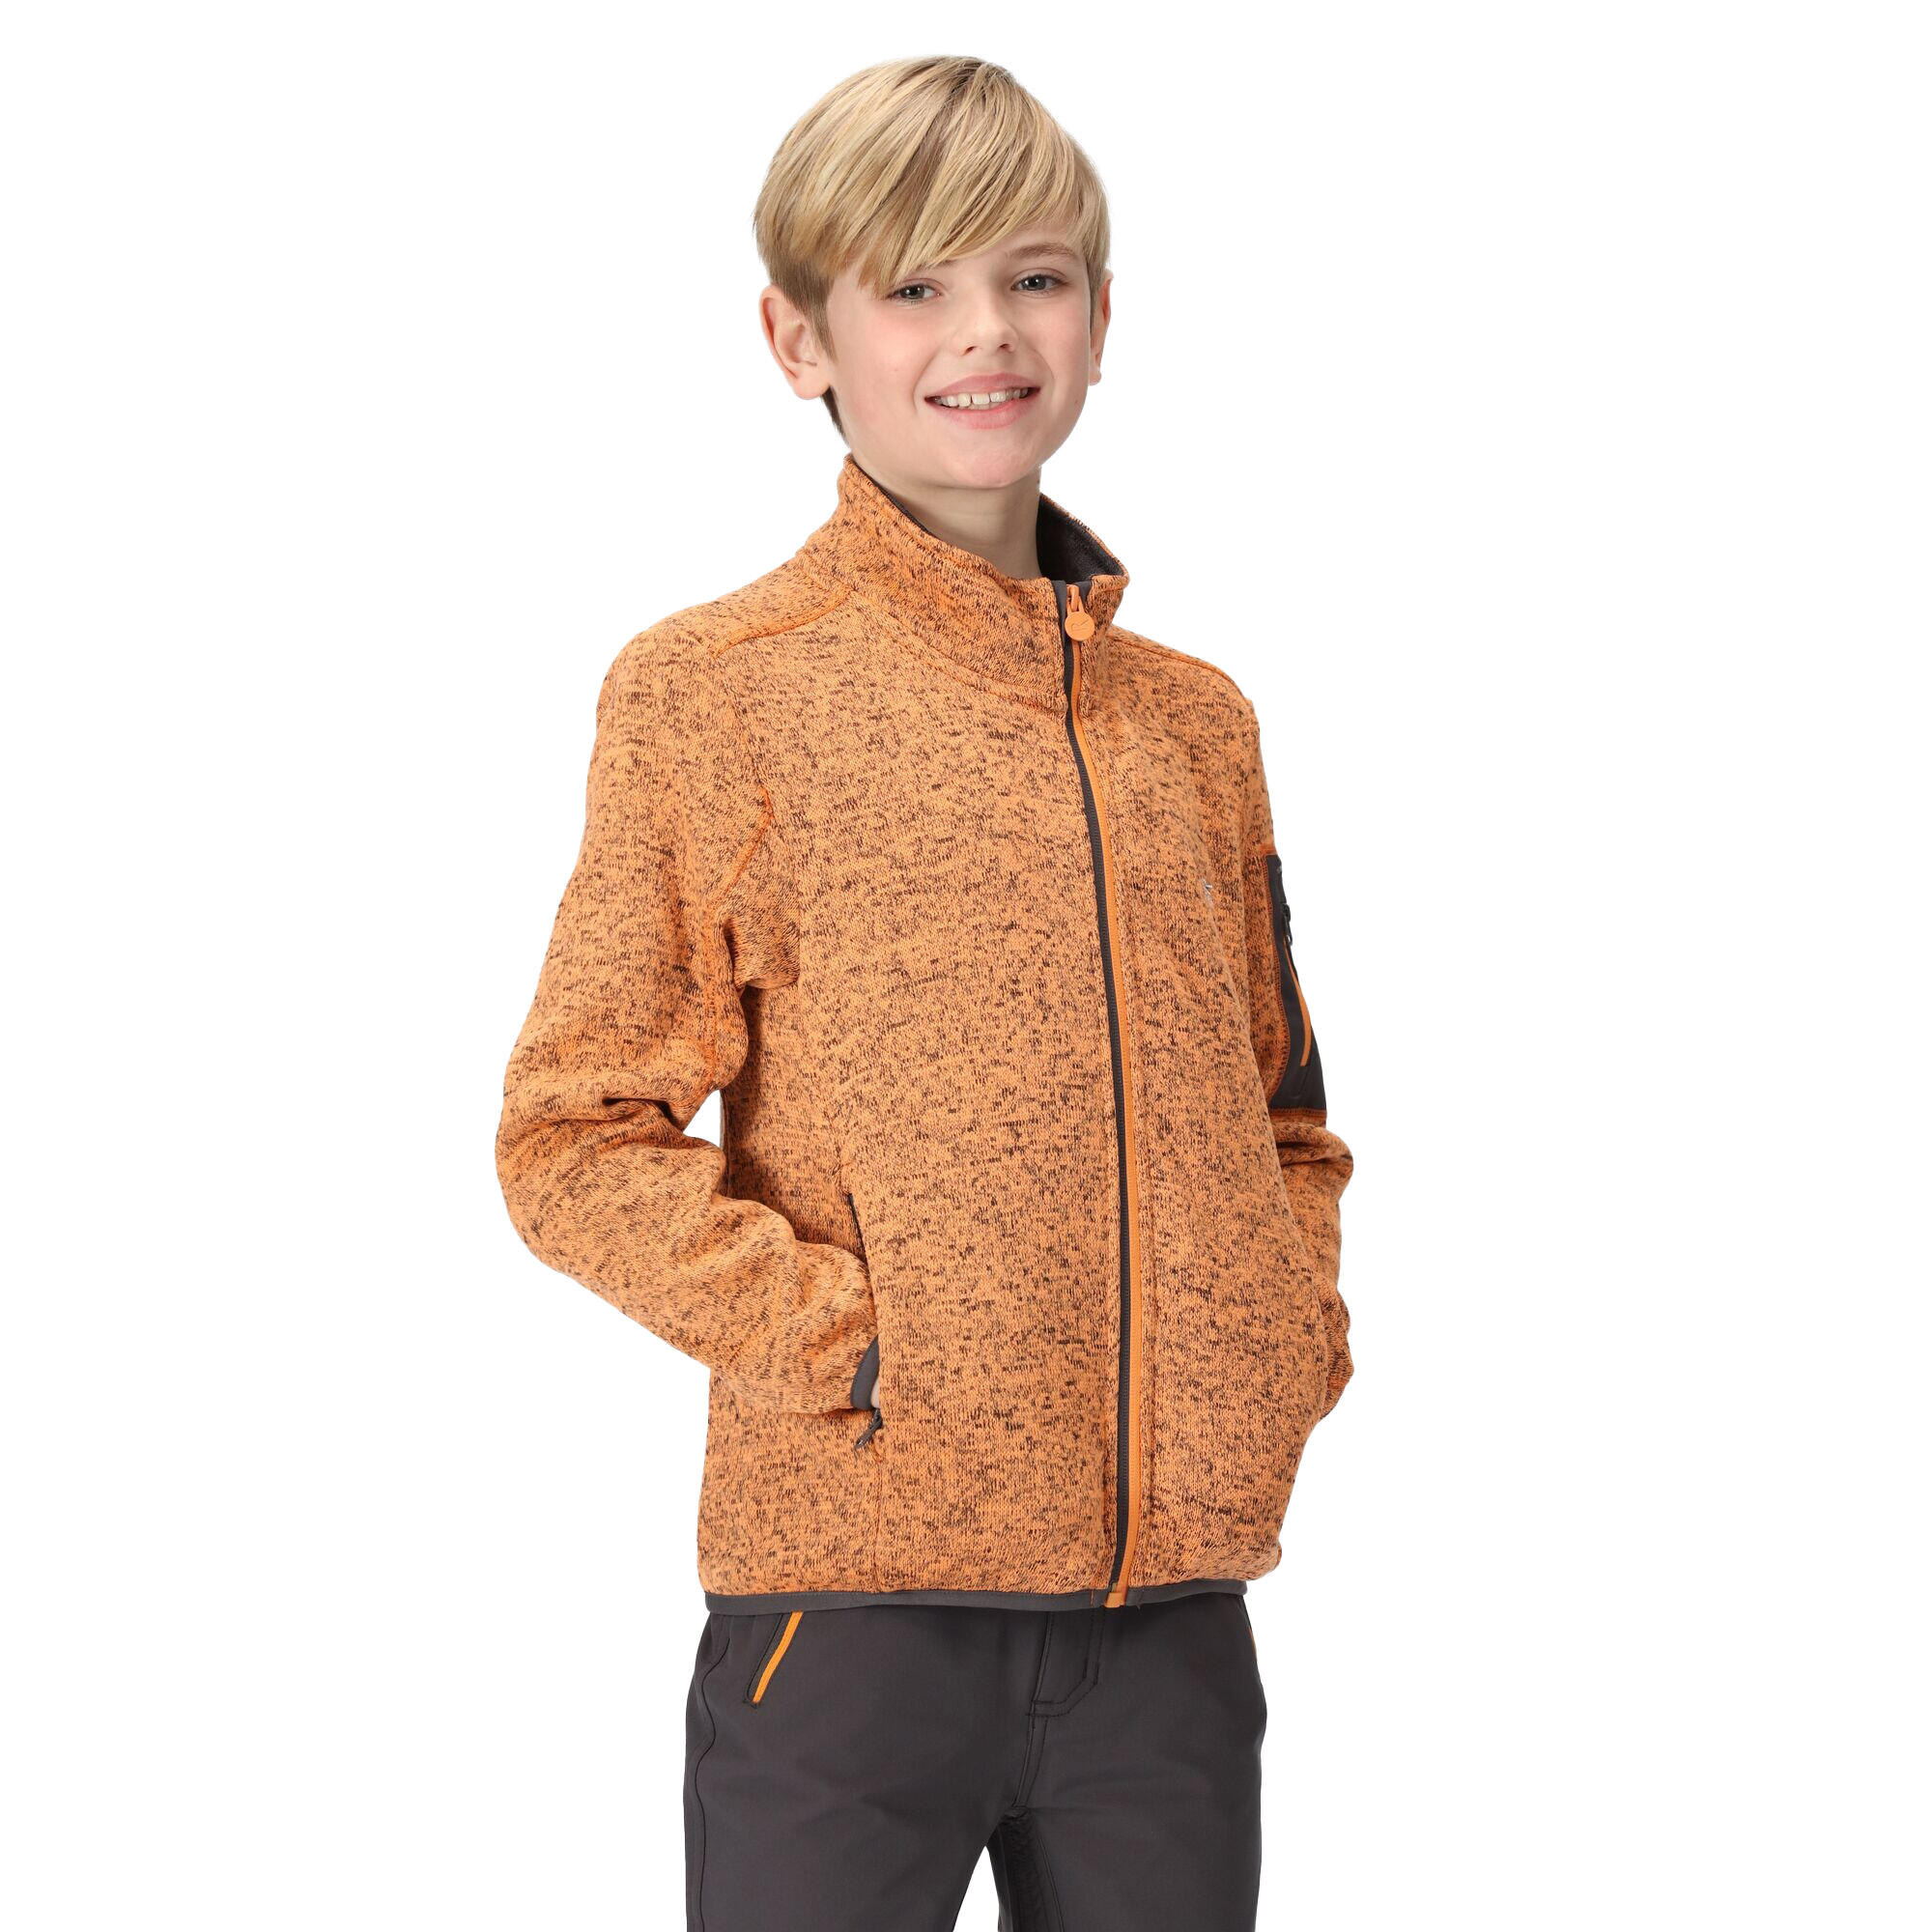 Childrens/Kids Newhill Fleece Jacket (Apricot Crush/Seal Grey) 4/5